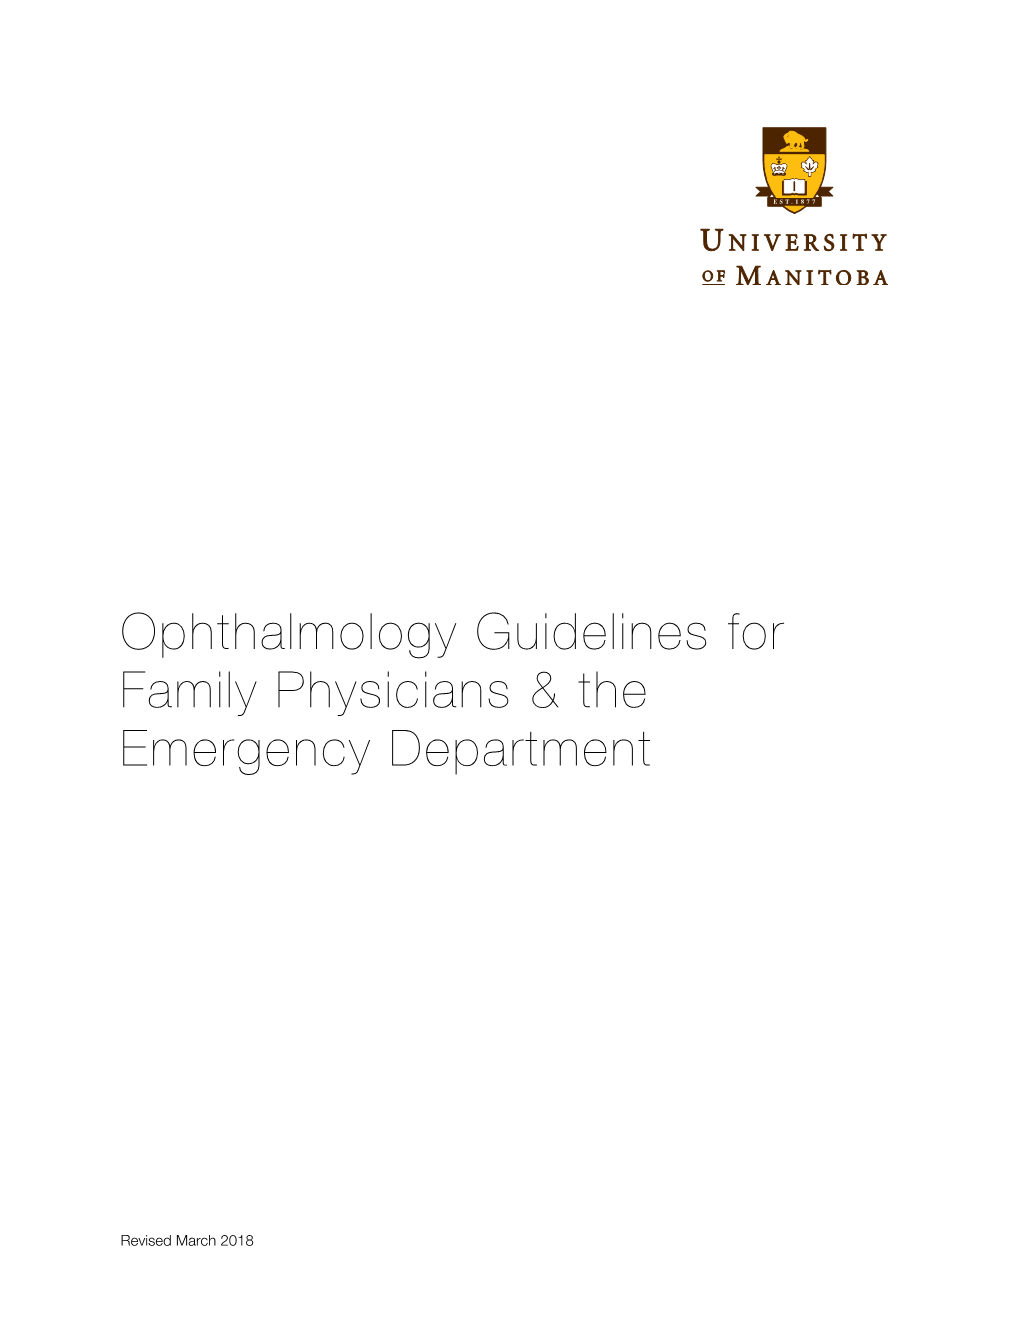 ED Ophthalmology Guidelines